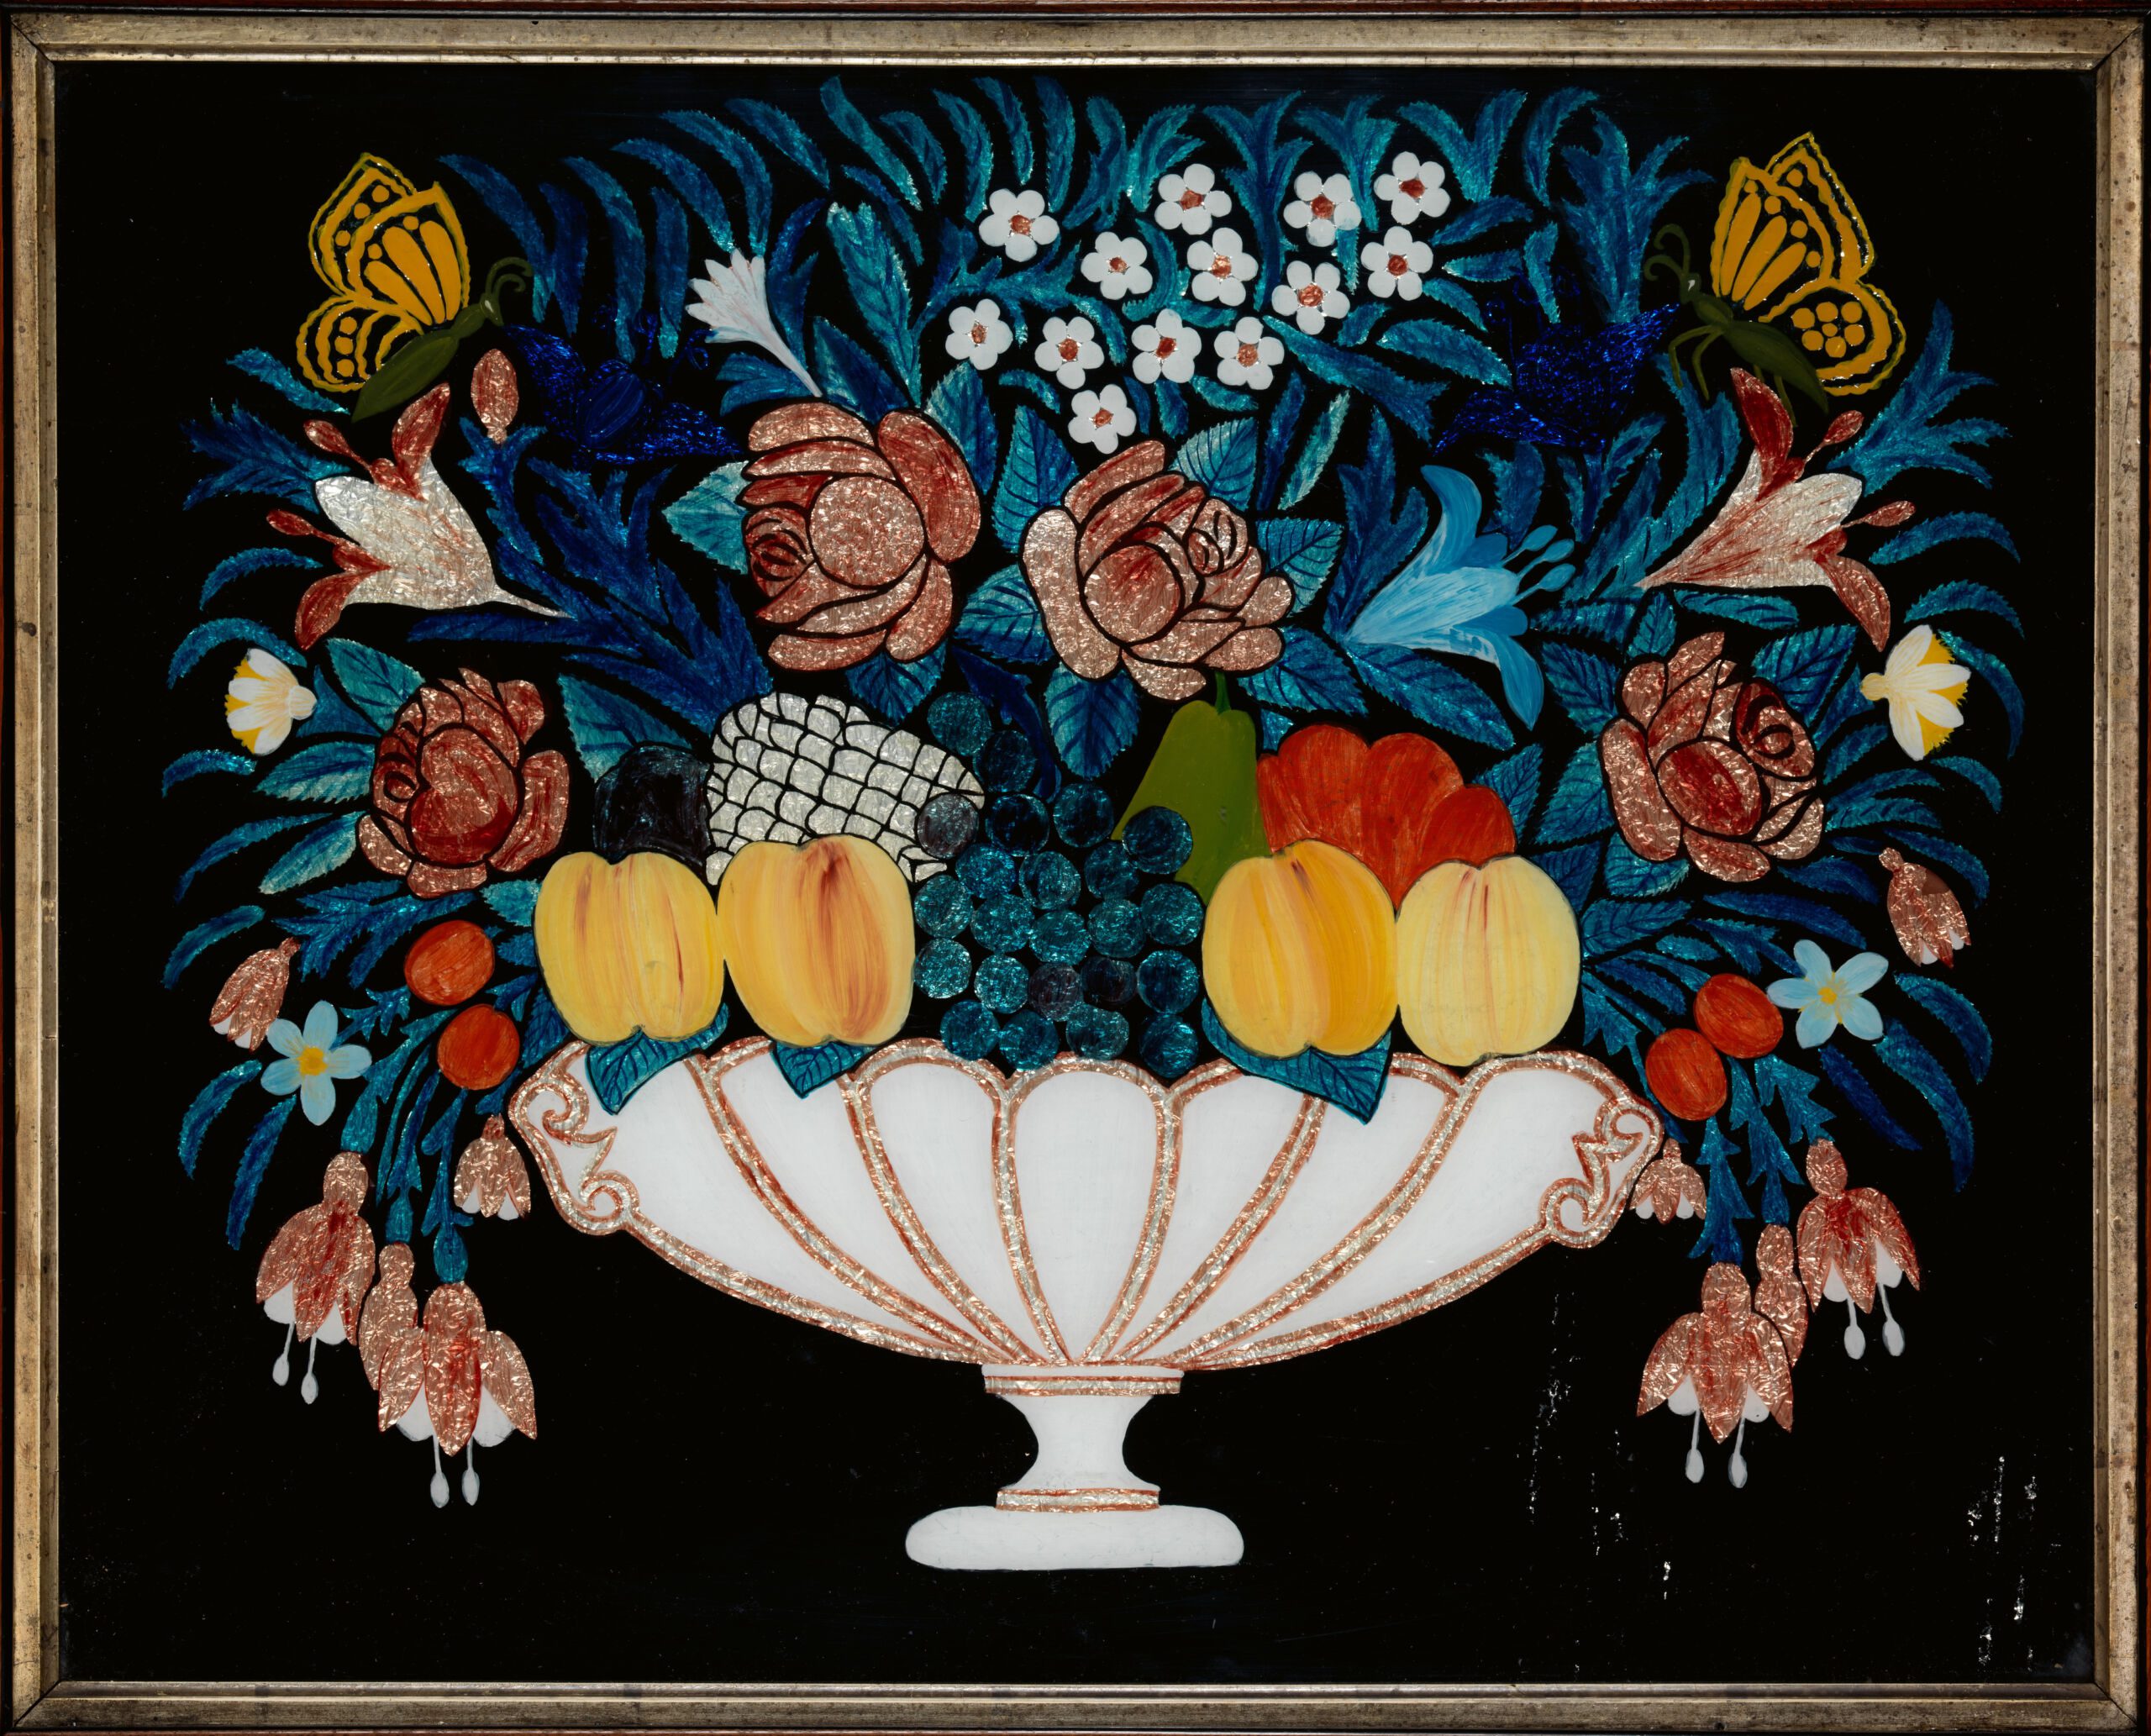 A still-life painting of fruit and flowers in a white bowl against a black background